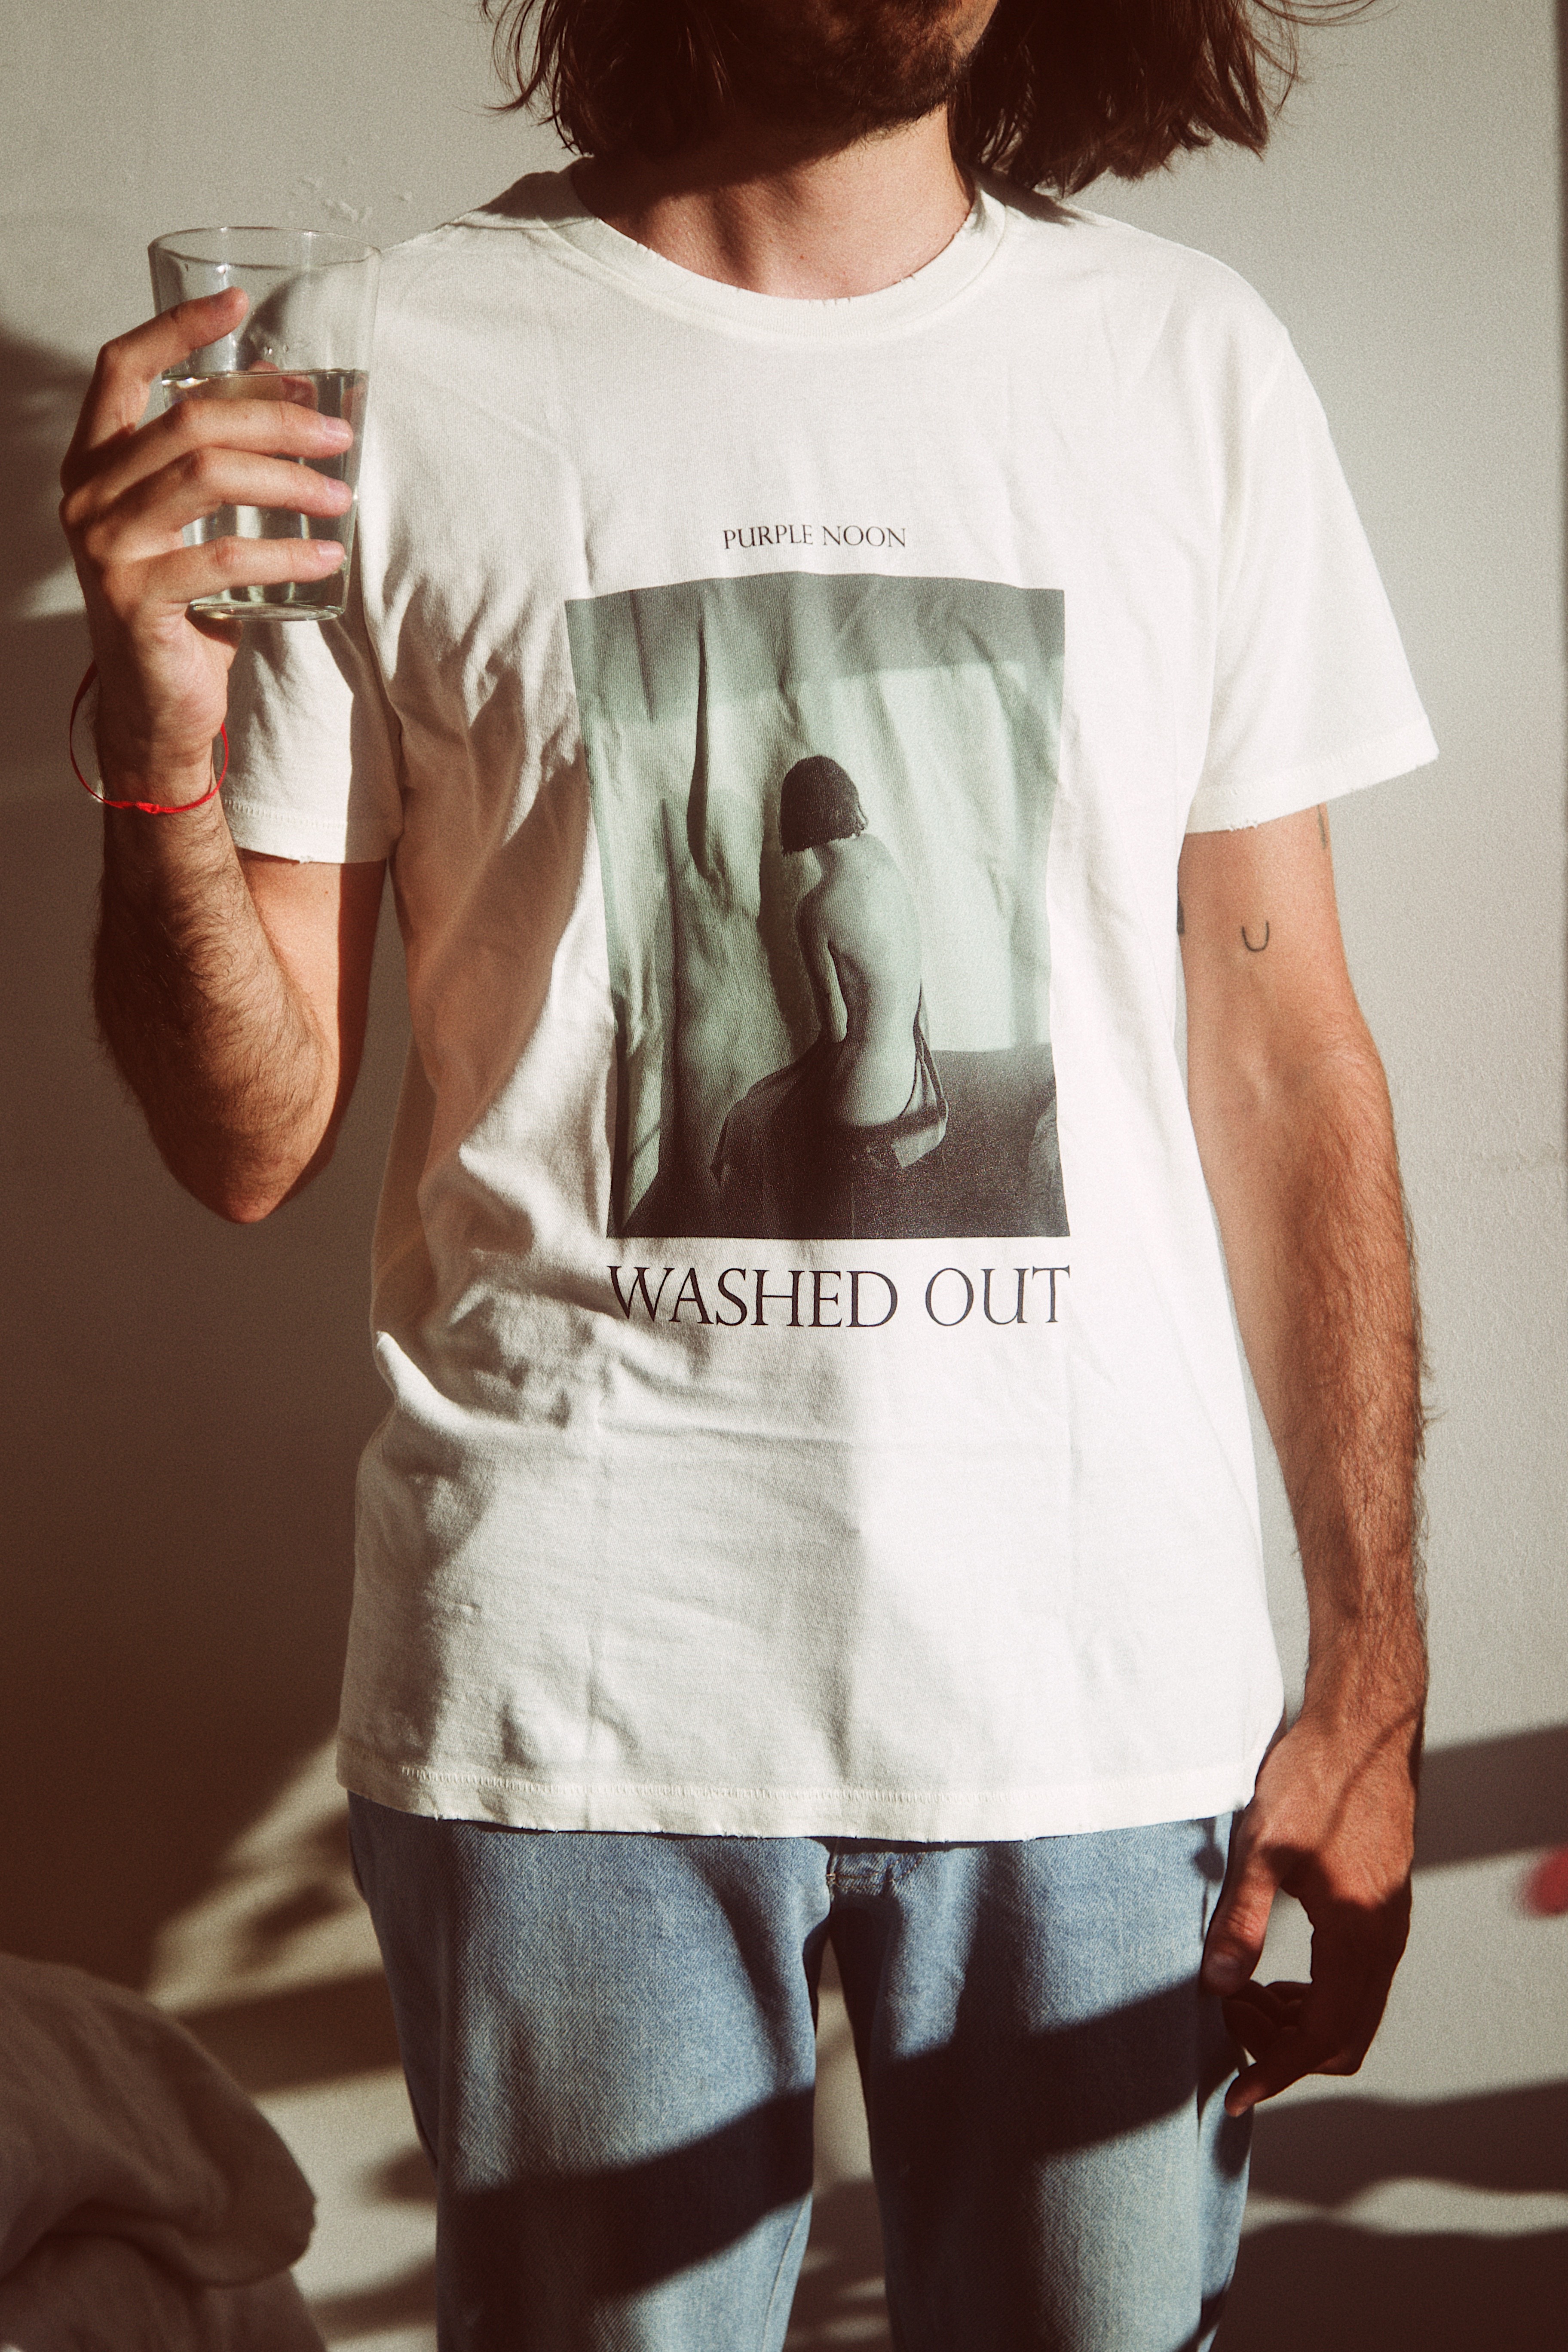 Be washed перевод. Washed out фотосессия. Washed out группа. Belong Washed out. Washed out Simon faliu.